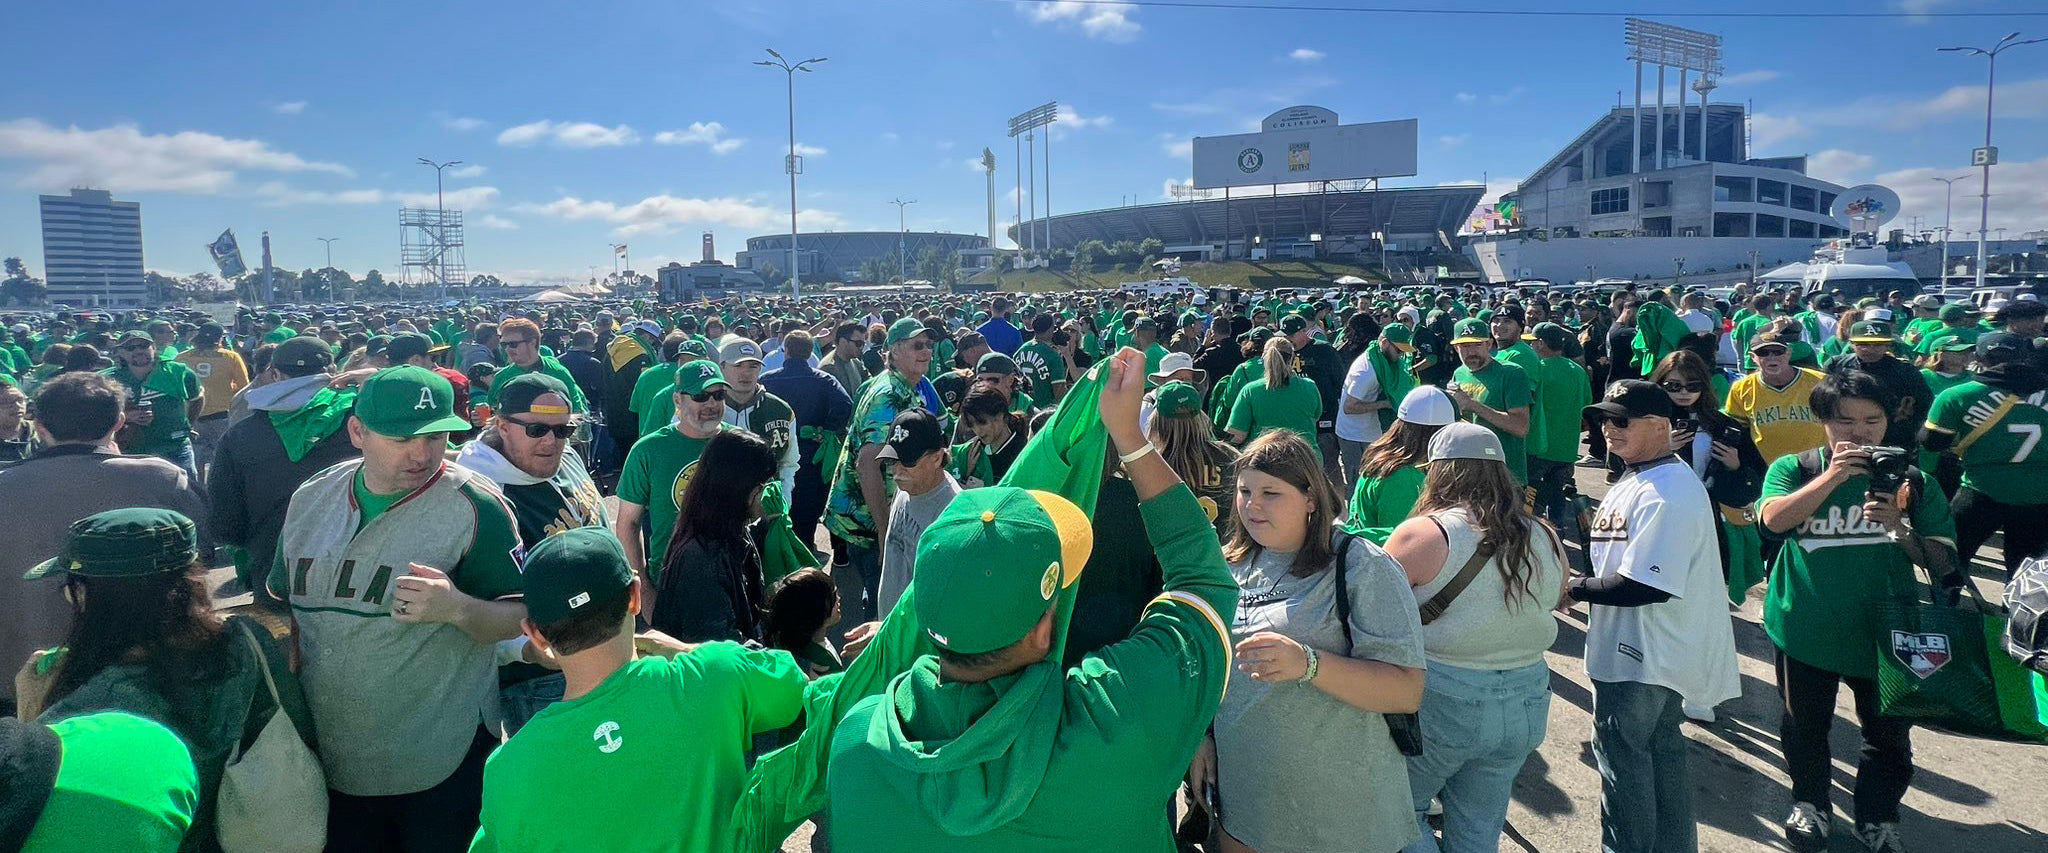 Photo of a crowd in the parking lot outside the baseball stadium in Oakland, CA on reverse boycott day, tailgating and handing out kelly green SELL tees